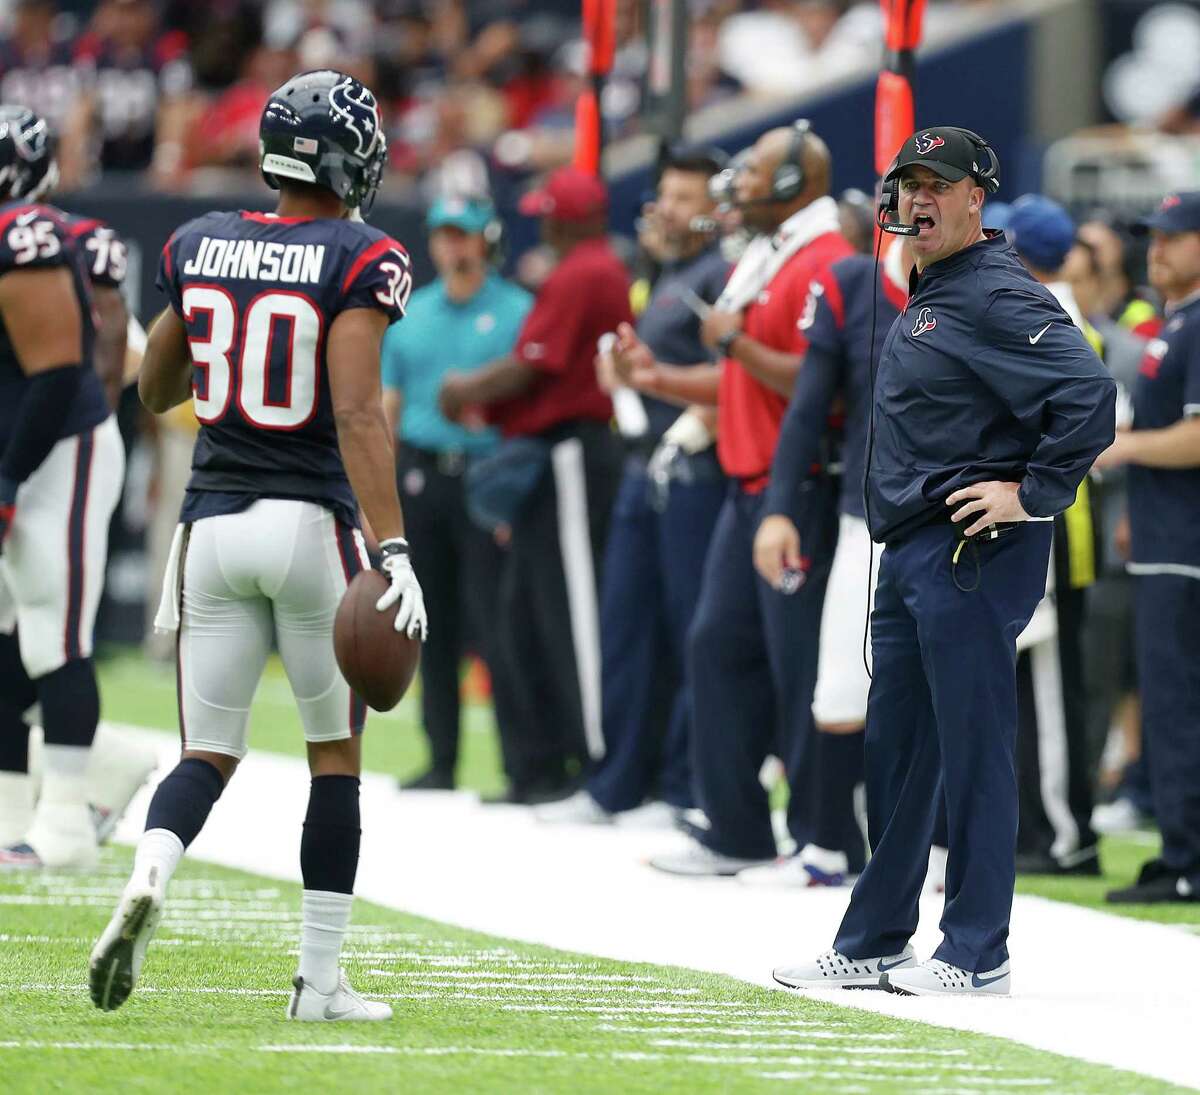 Houston Texans head coach Bill O'Brien as yells as cornerback Kevin Johnson (30) comes back to the bench during the first half of an NFL football game at NRG Stadium, Sunday, Sept. 18, 2016 in Houston.